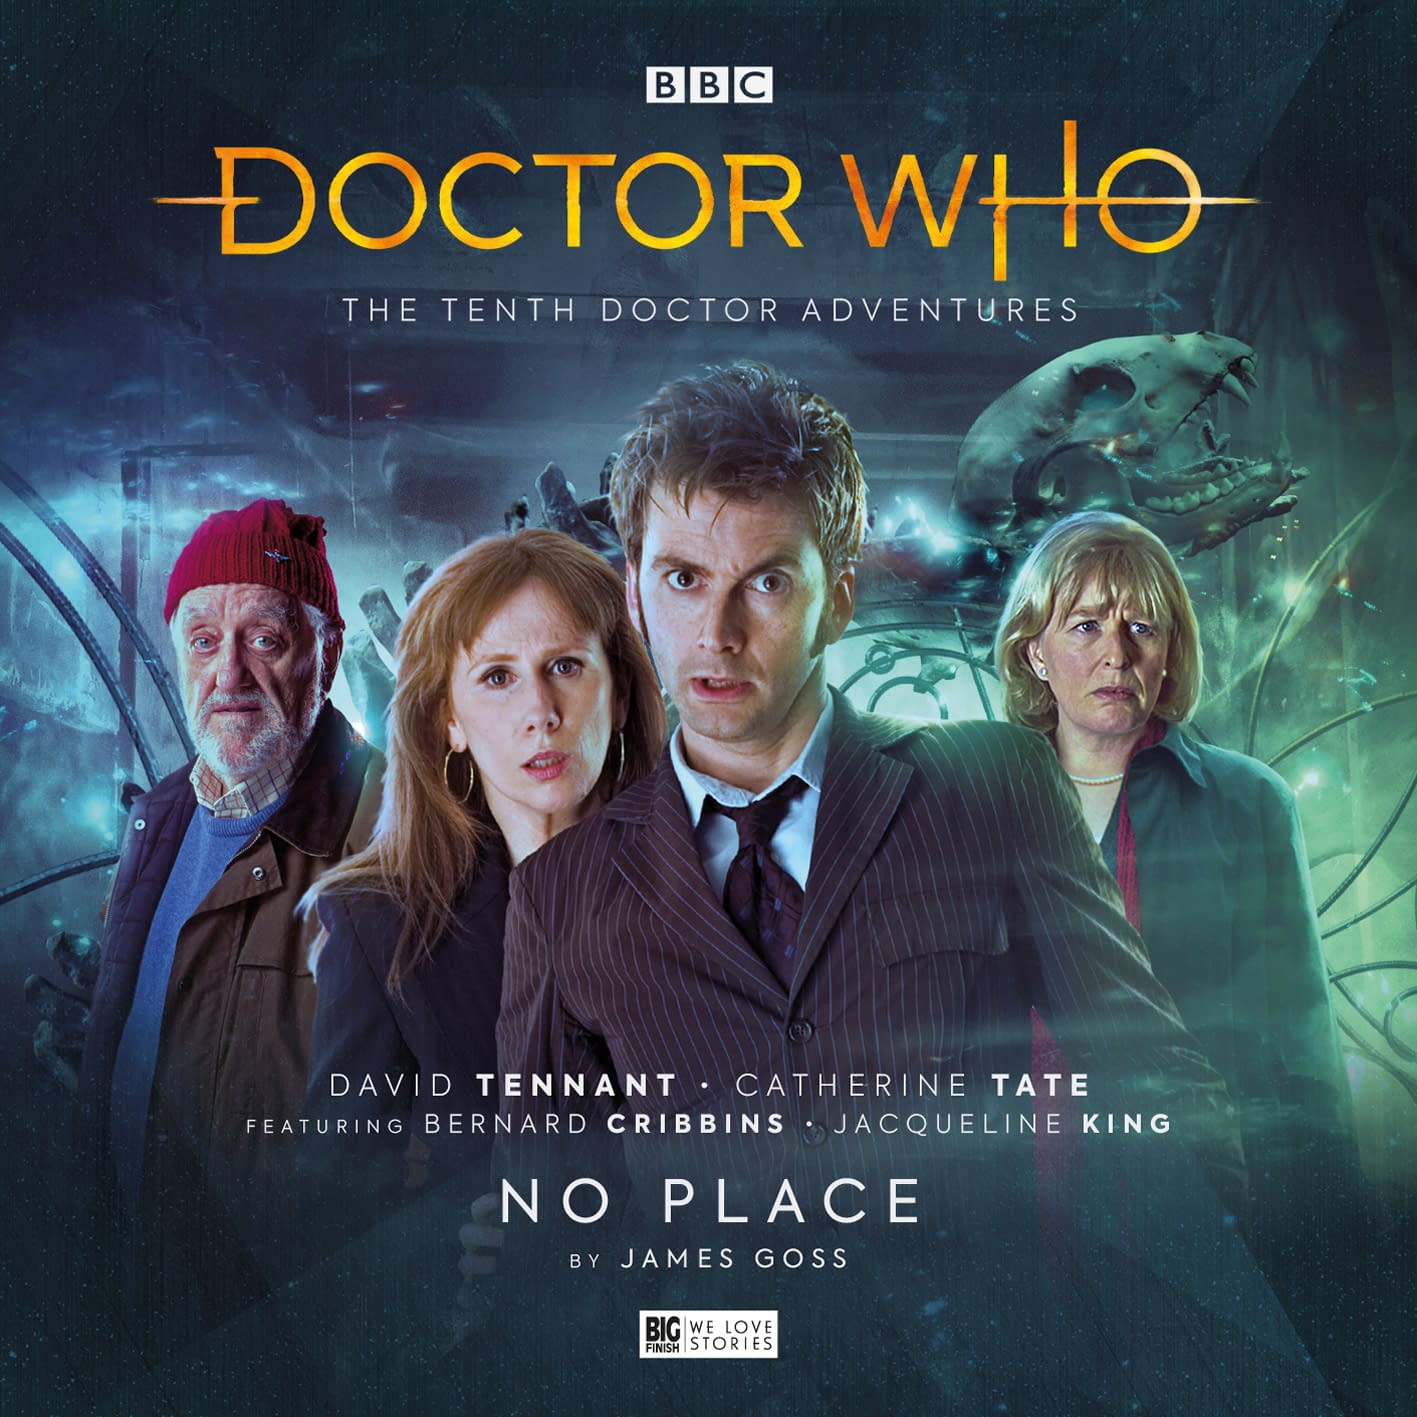 Big Finish Releases Doctor Who: The Tenth Doctor Adventures Volume 03